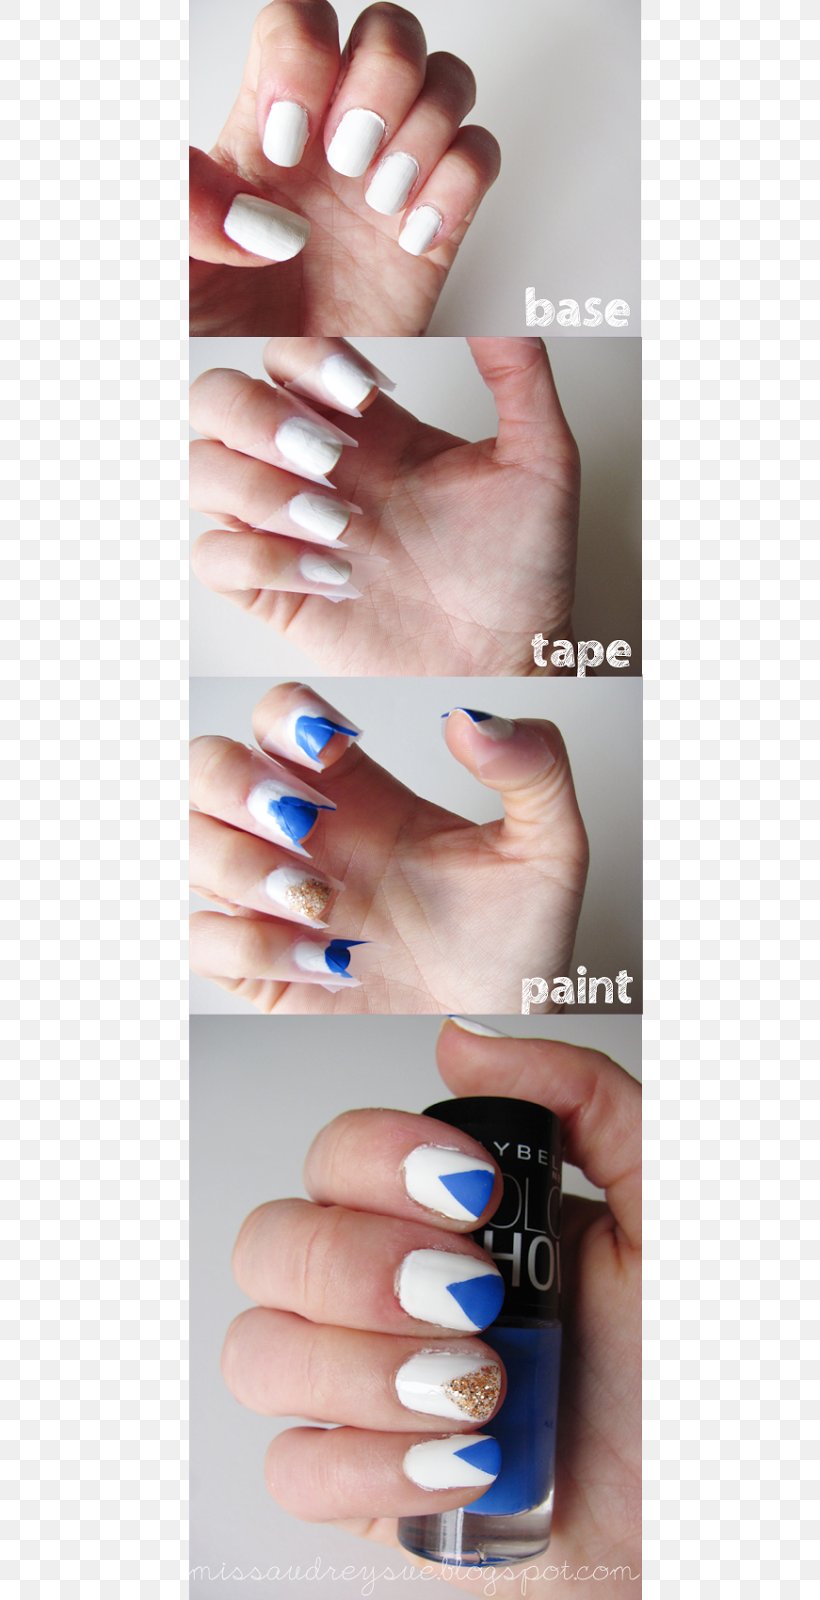 Nail Polish Manicure Hand Model Product Design, PNG, 659x1600px, Nail, Cosmetics, Finger, Hand, Hand Model Download Free